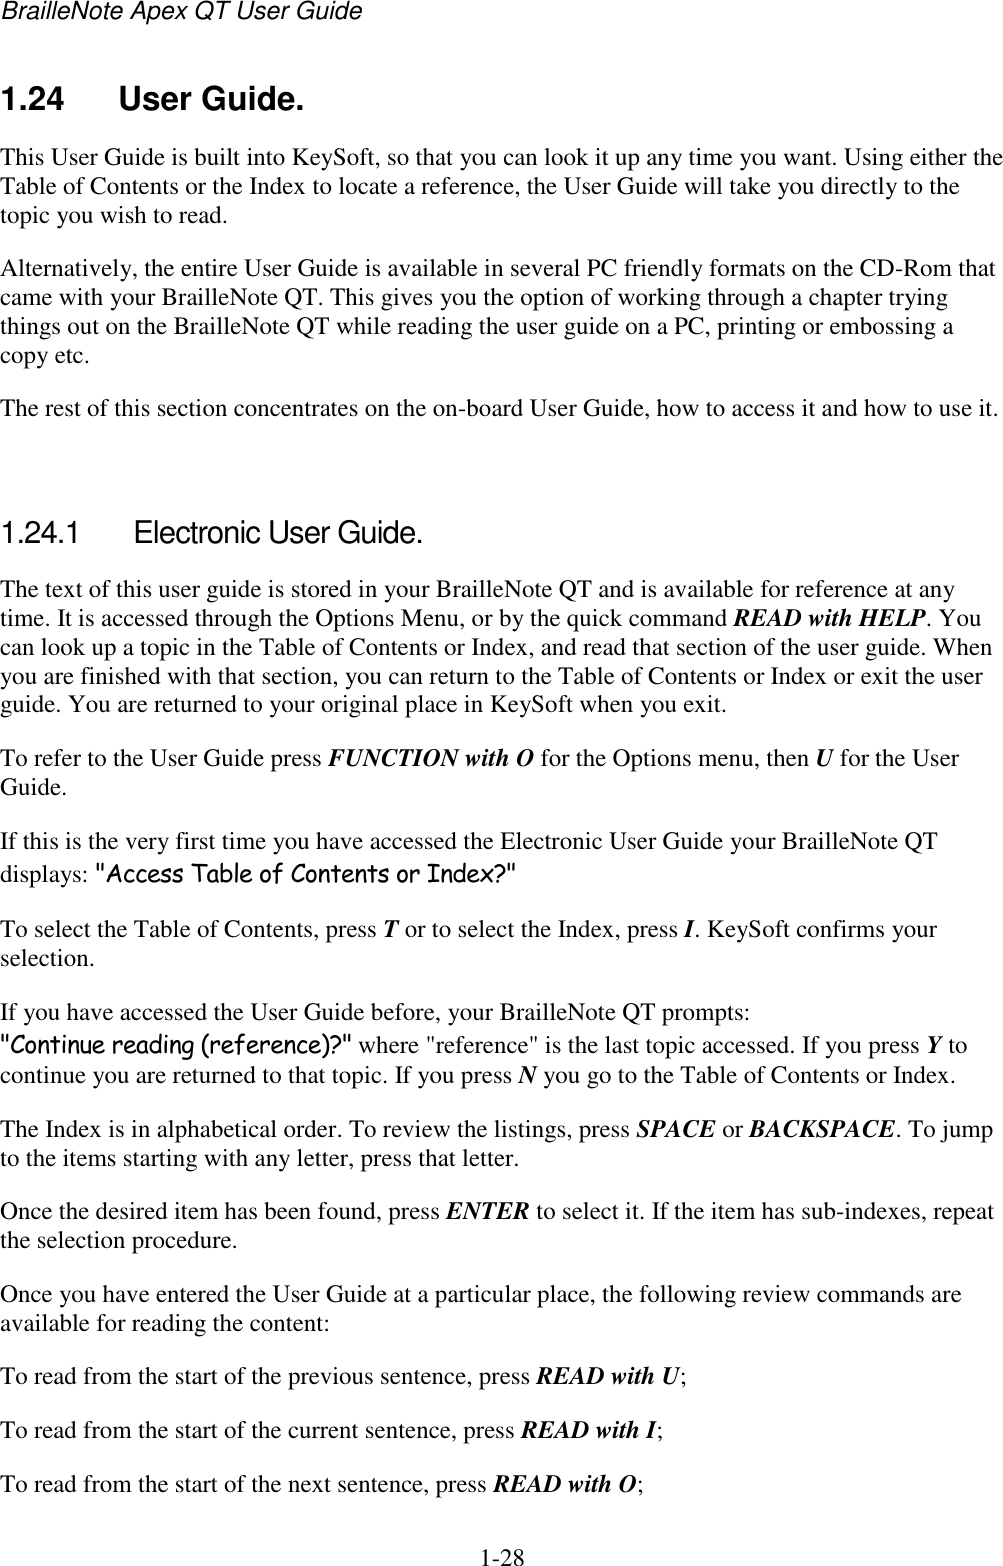 BrailleNote Apex QT User Guide  1-28   1.24  User Guide. This User Guide is built into KeySoft, so that you can look it up any time you want. Using either the Table of Contents or the Index to locate a reference, the User Guide will take you directly to the topic you wish to read. Alternatively, the entire User Guide is available in several PC friendly formats on the CD-Rom that came with your BrailleNote QT. This gives you the option of working through a chapter trying things out on the BrailleNote QT while reading the user guide on a PC, printing or embossing a copy etc. The rest of this section concentrates on the on-board User Guide, how to access it and how to use it.  1.24.1  Electronic User Guide. The text of this user guide is stored in your BrailleNote QT and is available for reference at any time. It is accessed through the Options Menu, or by the quick command READ with HELP. You can look up a topic in the Table of Contents or Index, and read that section of the user guide. When you are finished with that section, you can return to the Table of Contents or Index or exit the user guide. You are returned to your original place in KeySoft when you exit. To refer to the User Guide press FUNCTION with O for the Options menu, then U for the User Guide. If this is the very first time you have accessed the Electronic User Guide your BrailleNote QT displays: &quot;Access Table of Contents or Index?&quot; To select the Table of Contents, press T or to select the Index, press I. KeySoft confirms your selection. If you have accessed the User Guide before, your BrailleNote QT prompts: &quot;Continue reading (reference)?&quot; where &quot;reference&quot; is the last topic accessed. If you press Y to continue you are returned to that topic. If you press N you go to the Table of Contents or Index. The Index is in alphabetical order. To review the listings, press SPACE or BACKSPACE. To jump to the items starting with any letter, press that letter.  Once the desired item has been found, press ENTER to select it. If the item has sub-indexes, repeat the selection procedure. Once you have entered the User Guide at a particular place, the following review commands are available for reading the content: To read from the start of the previous sentence, press READ with U; To read from the start of the current sentence, press READ with I; To read from the start of the next sentence, press READ with O; 